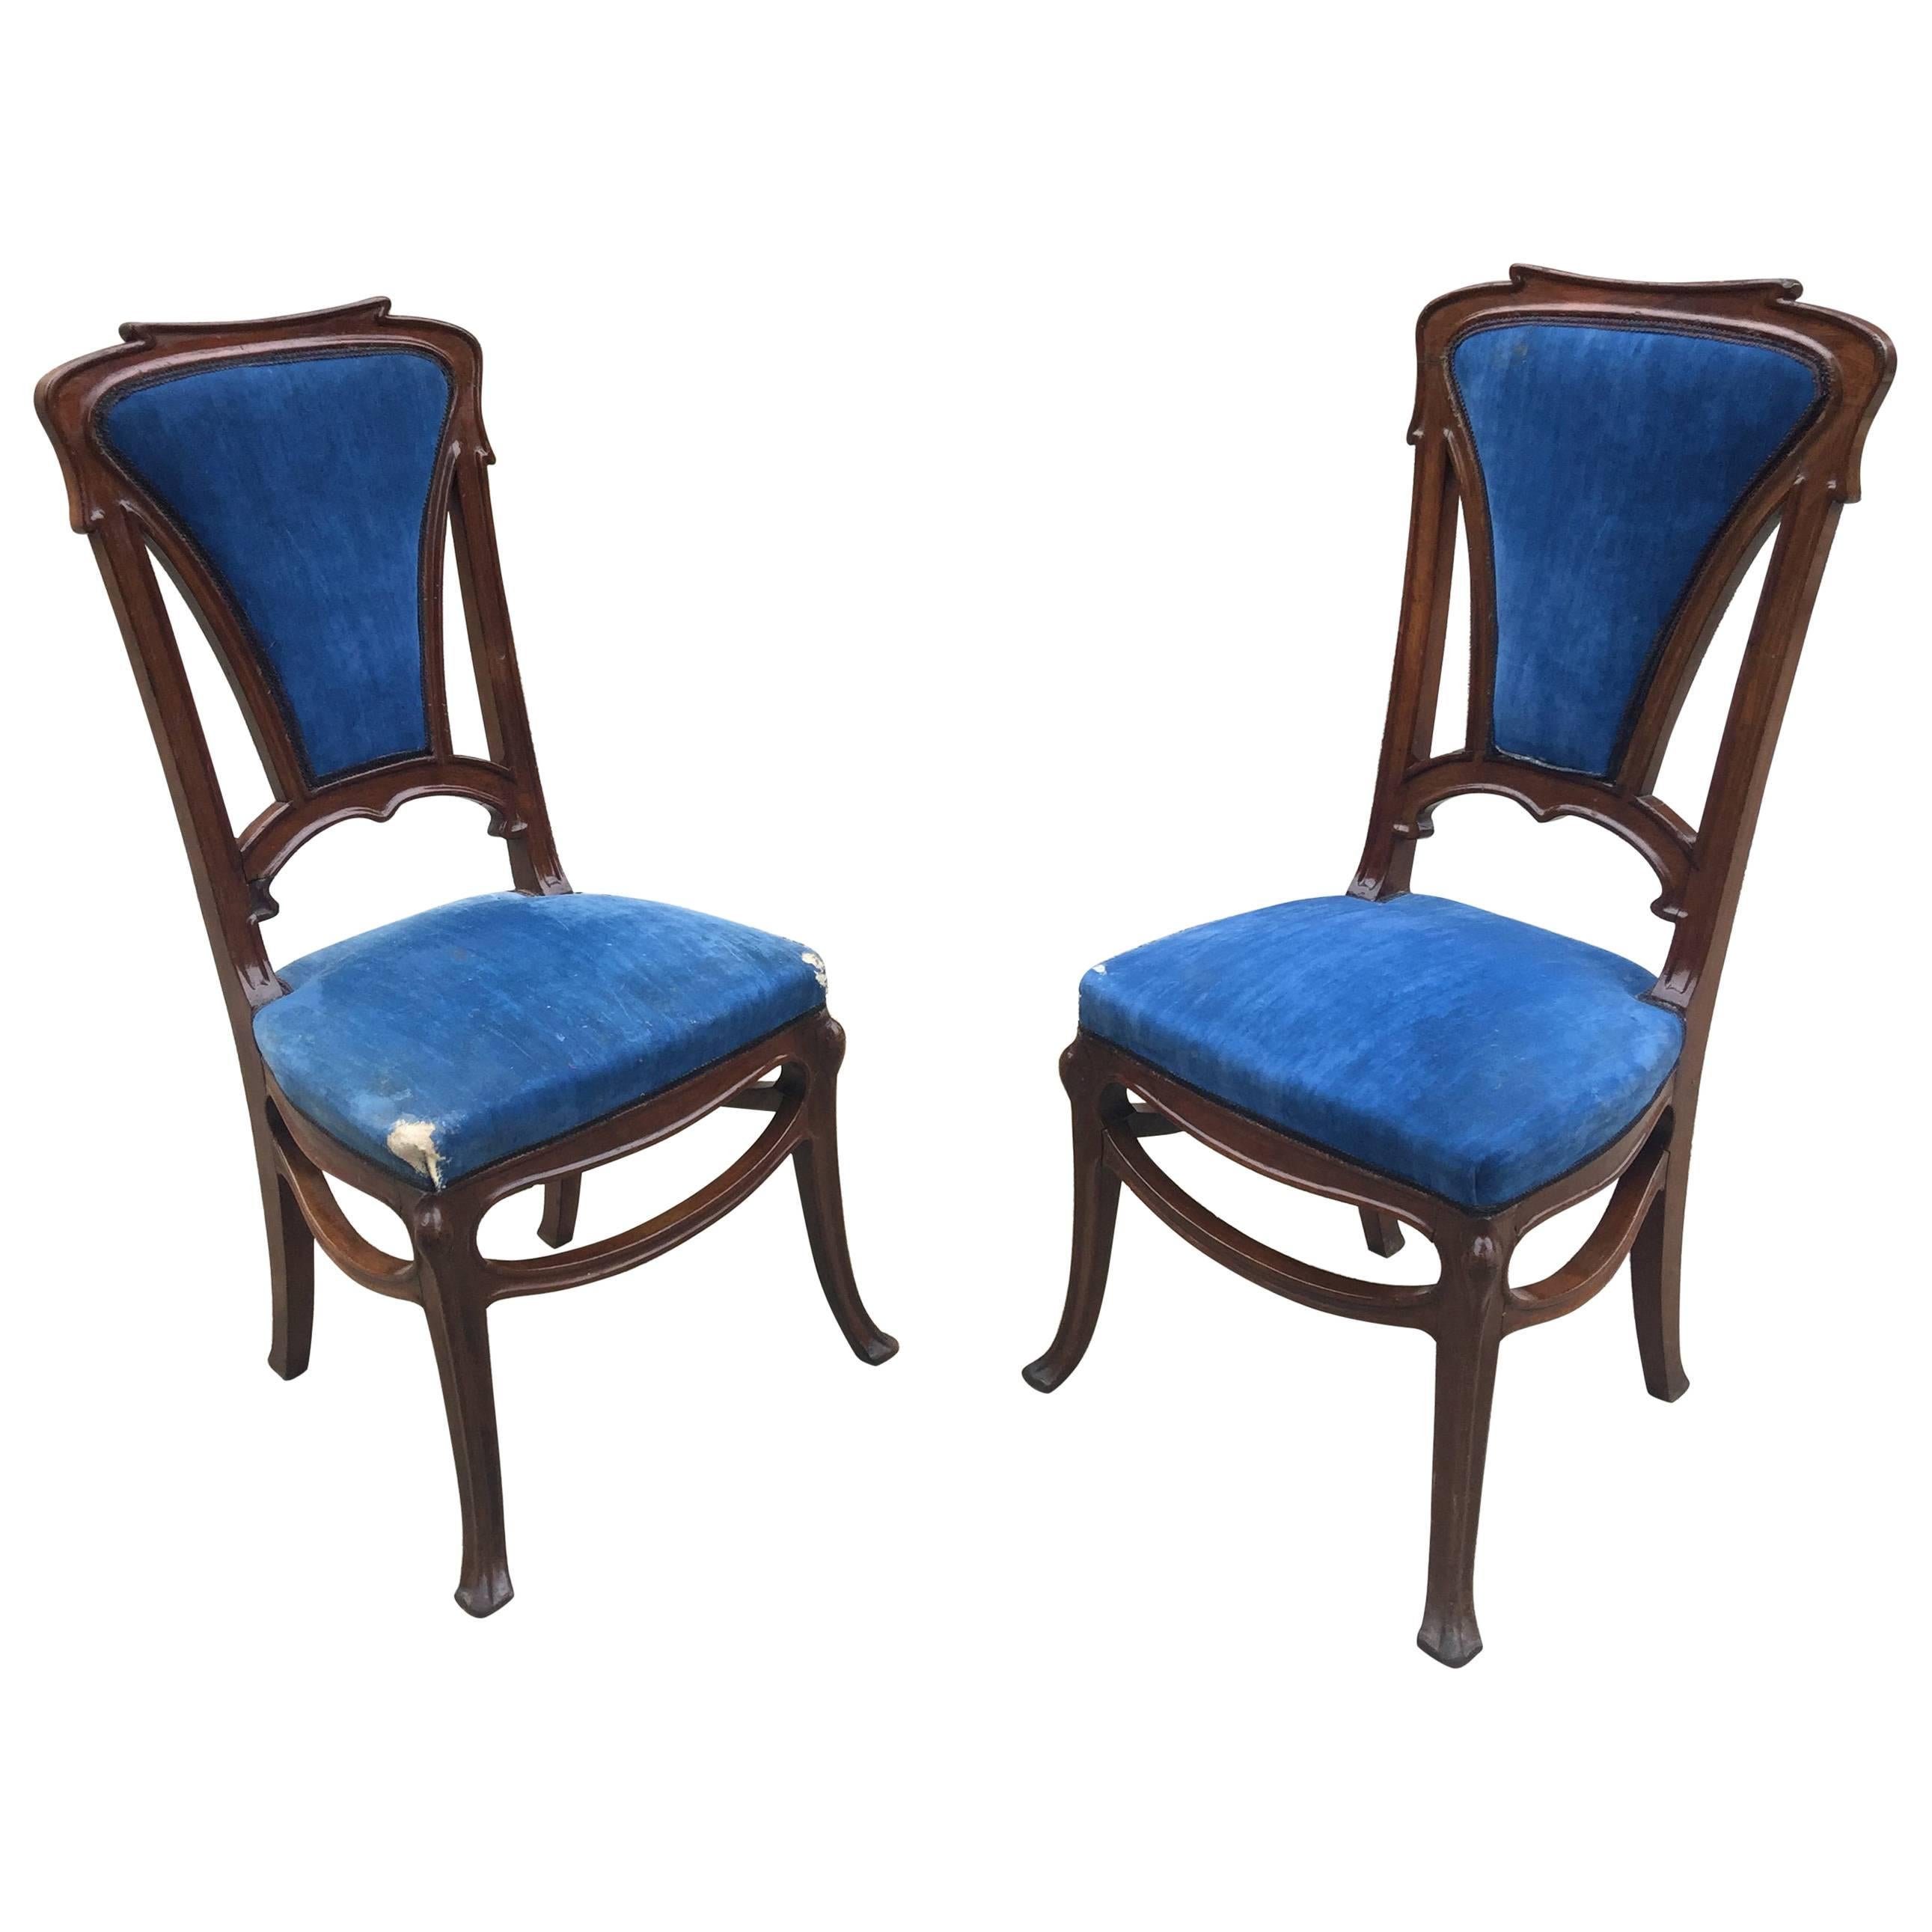 Pair of Art Nouveau Chairs in Mahogany, circa 1900